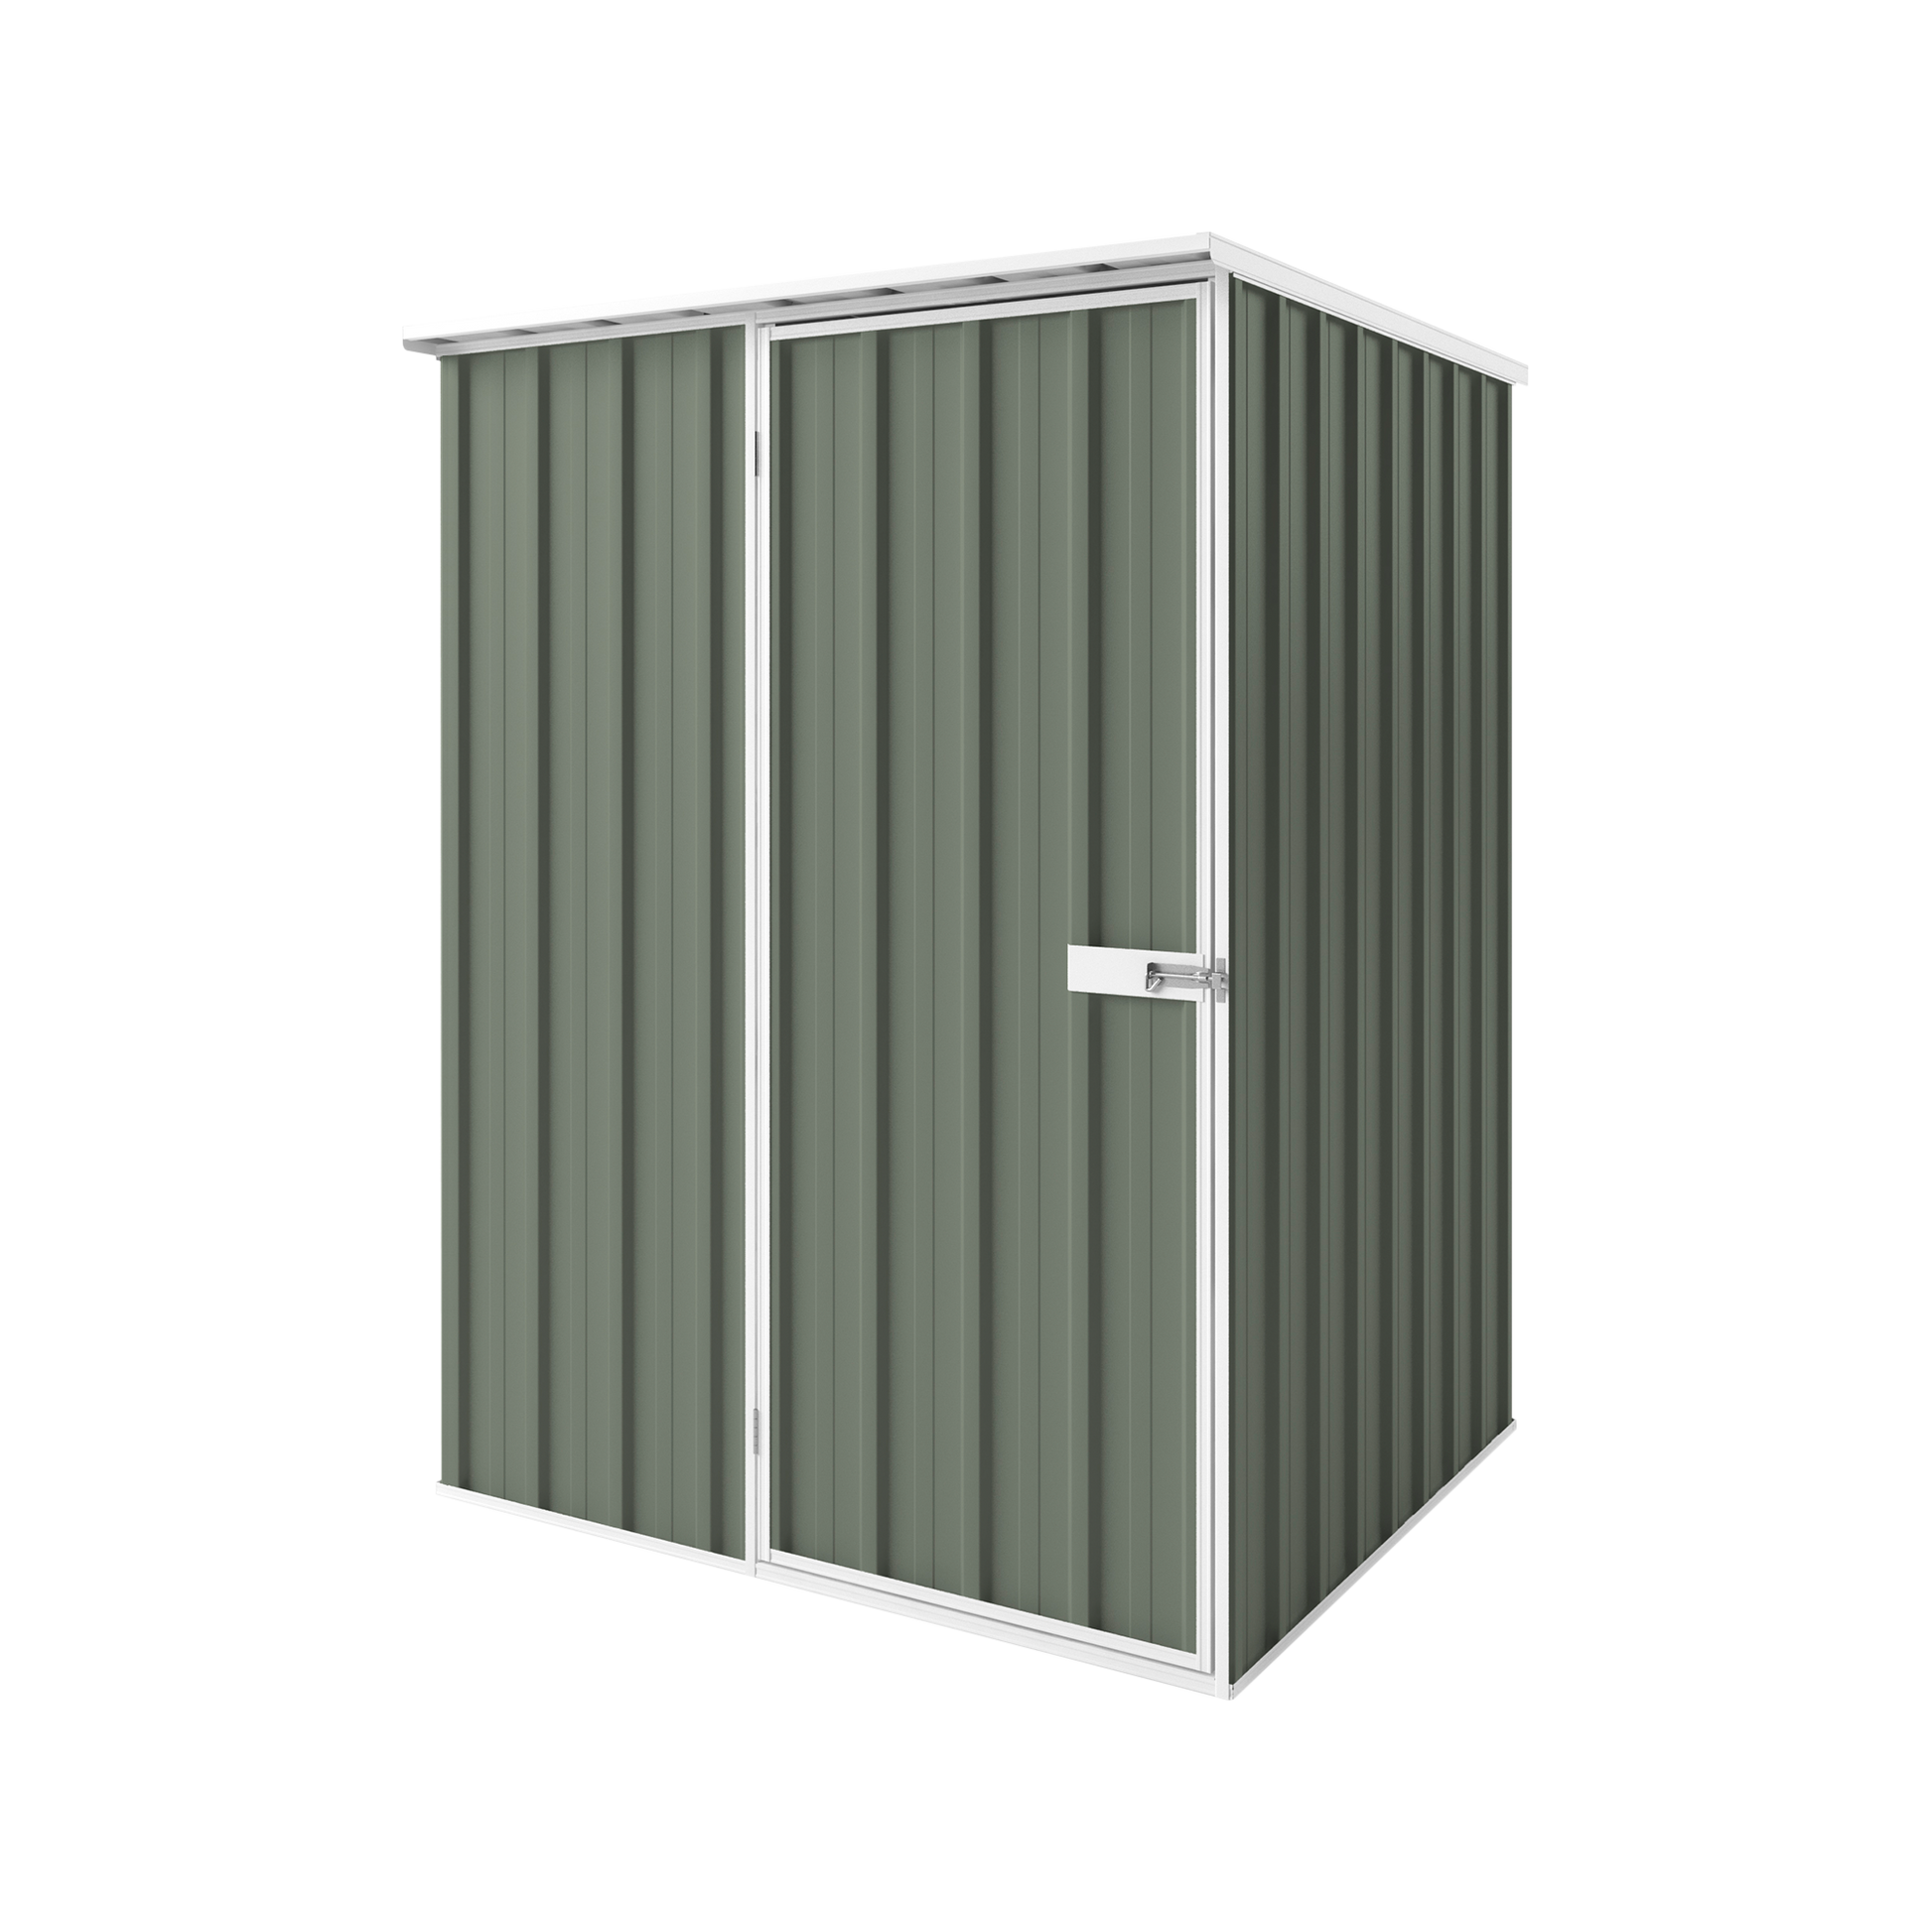 1.5m x 1.5m Flat Roof Garden Shed - EasyShed